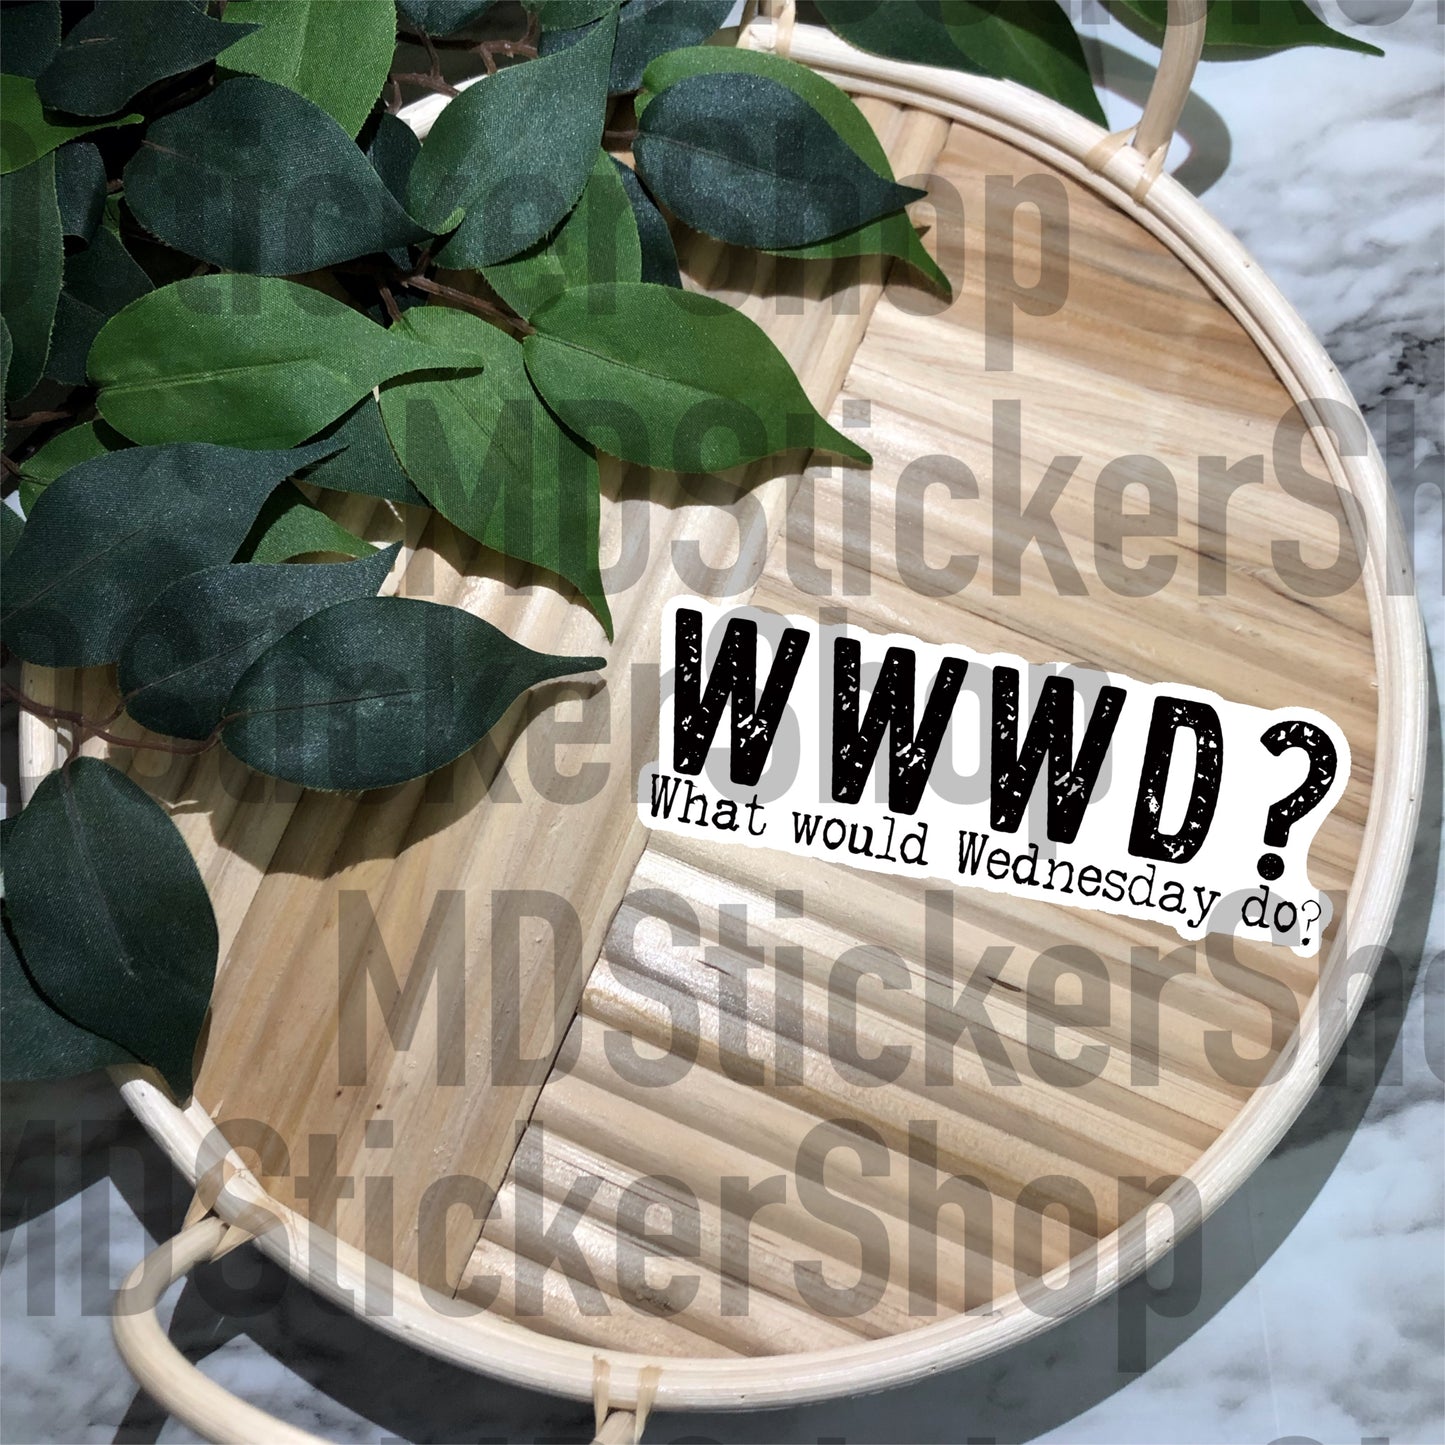 What Would Wednesday Do? Vinyl Sticker